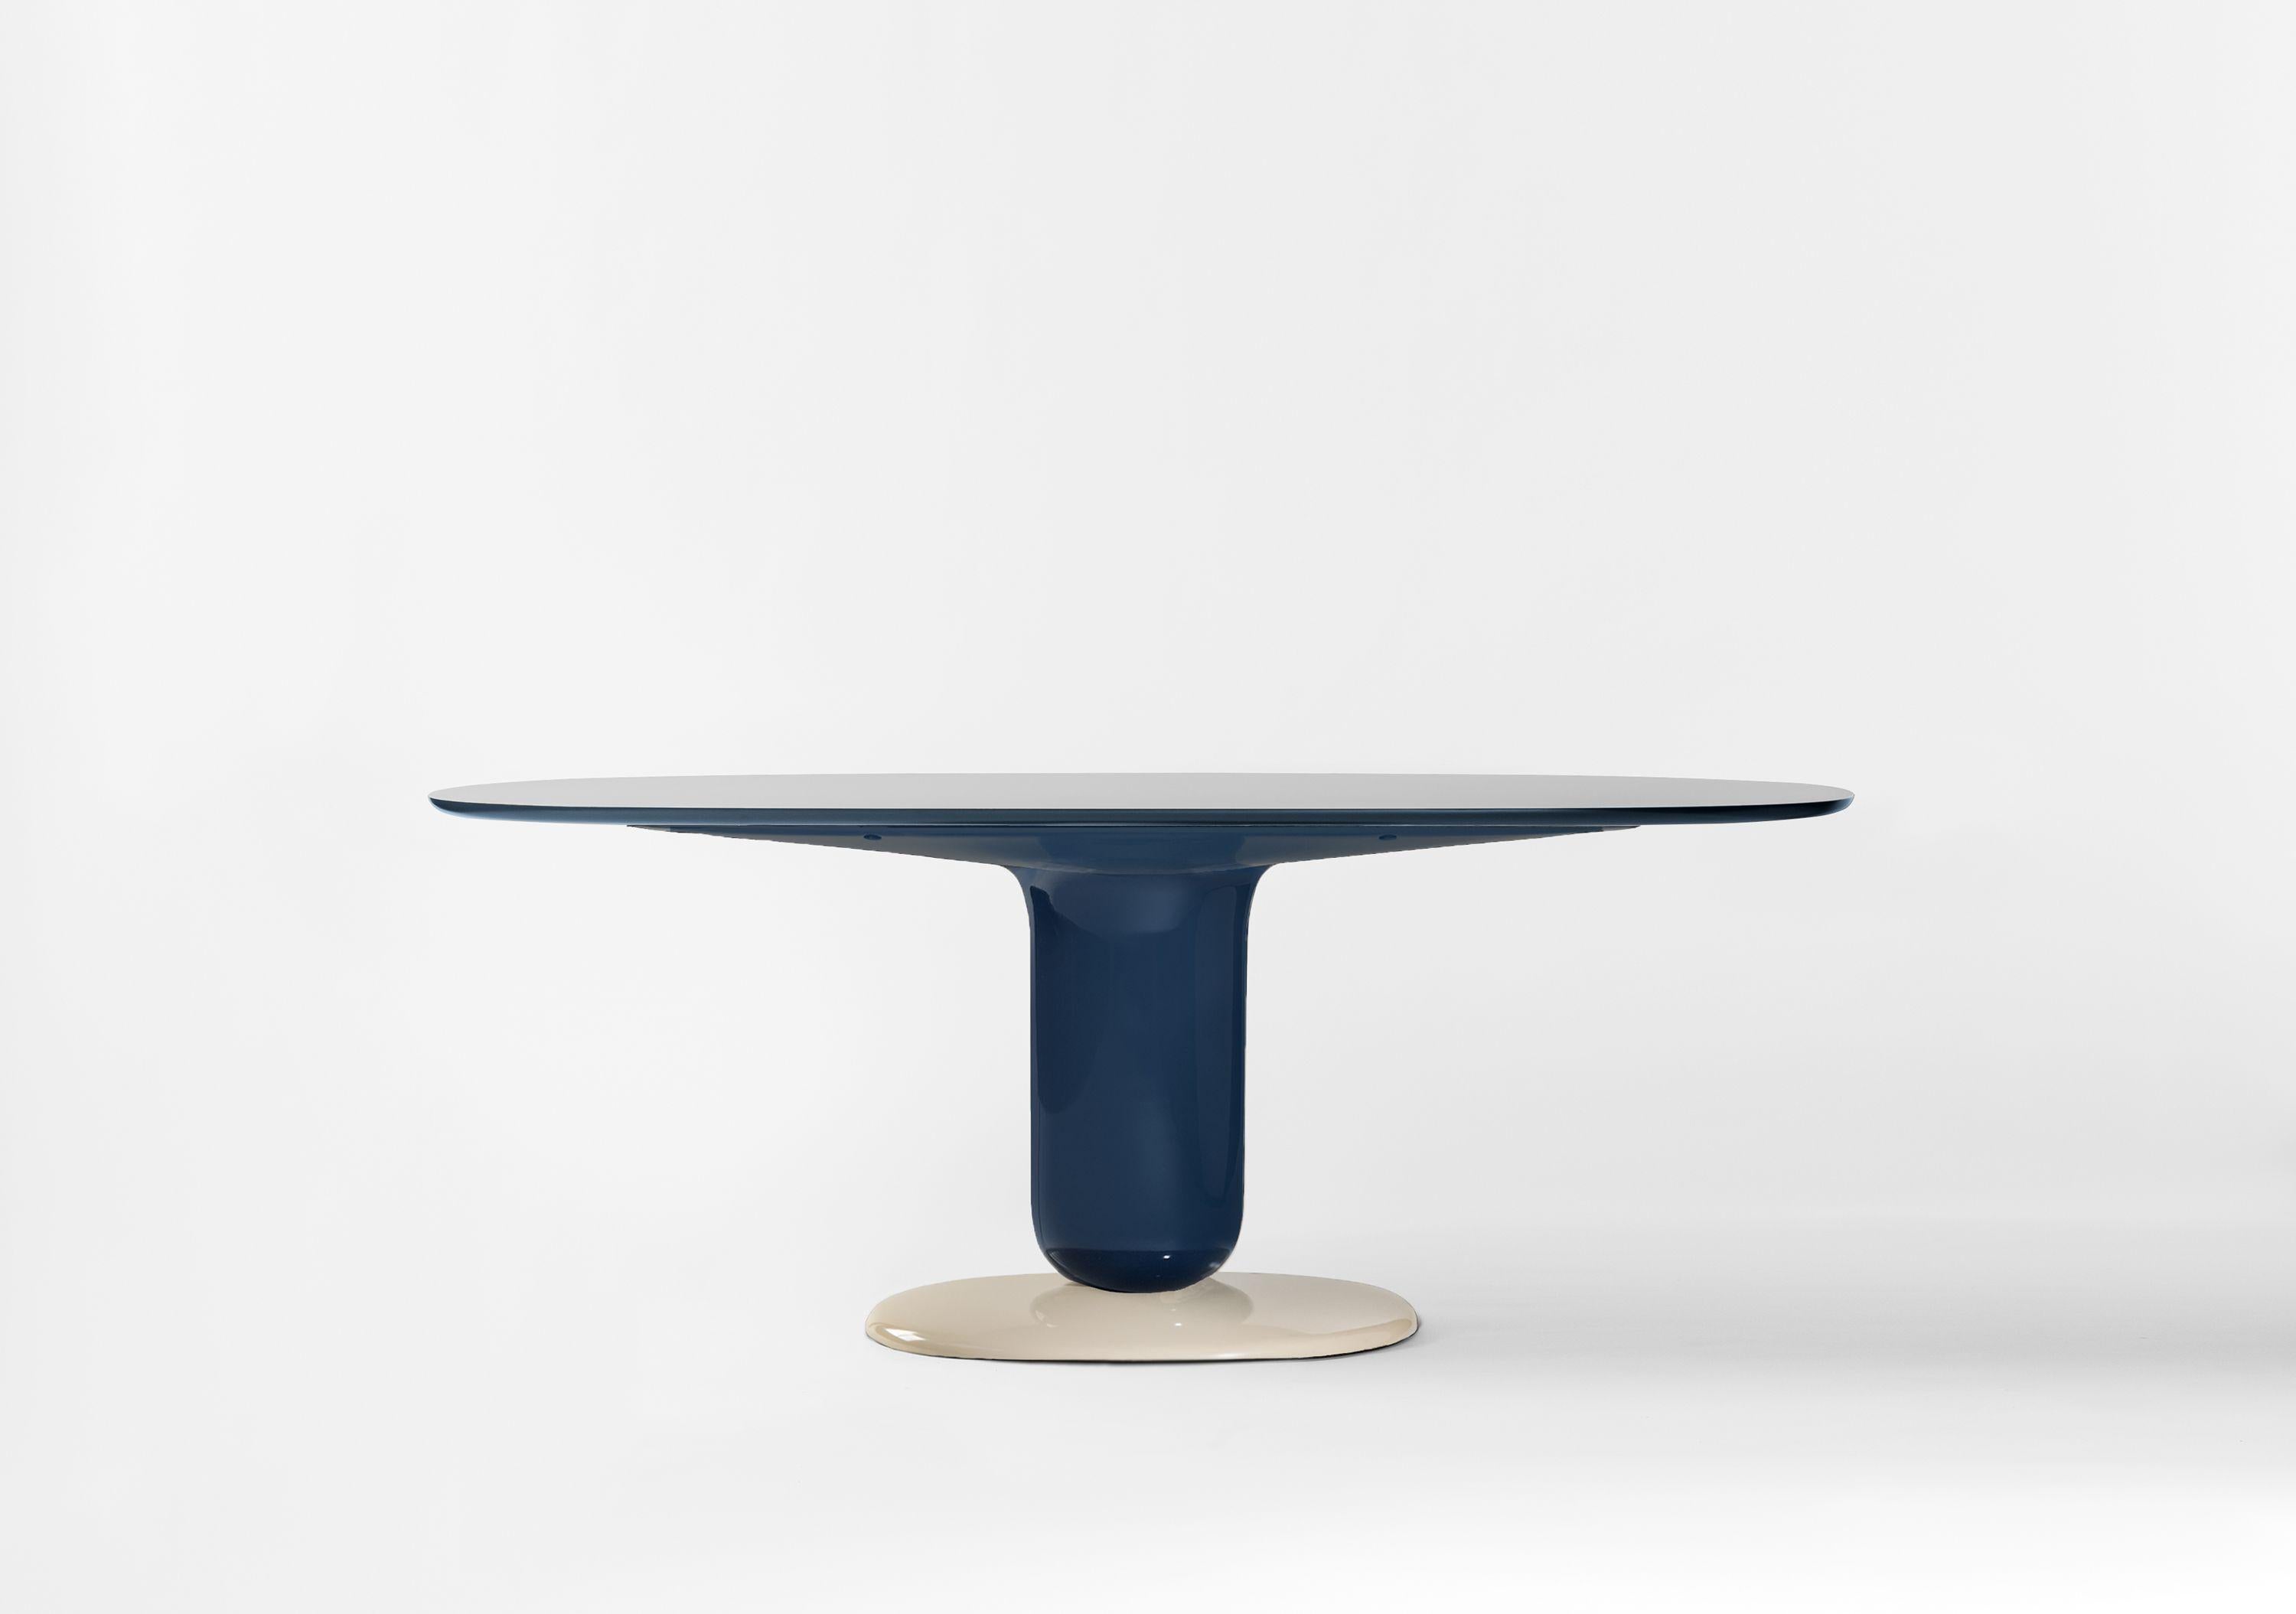 Multicolor Blue 190 dining table.

Design in 2021 by Jaime Hayon added to the Explorer collection that started in 2019.
Manufactured by BD Barcelona.

As a continuation of the playful Explorer Table series and following its elegant beauty, we